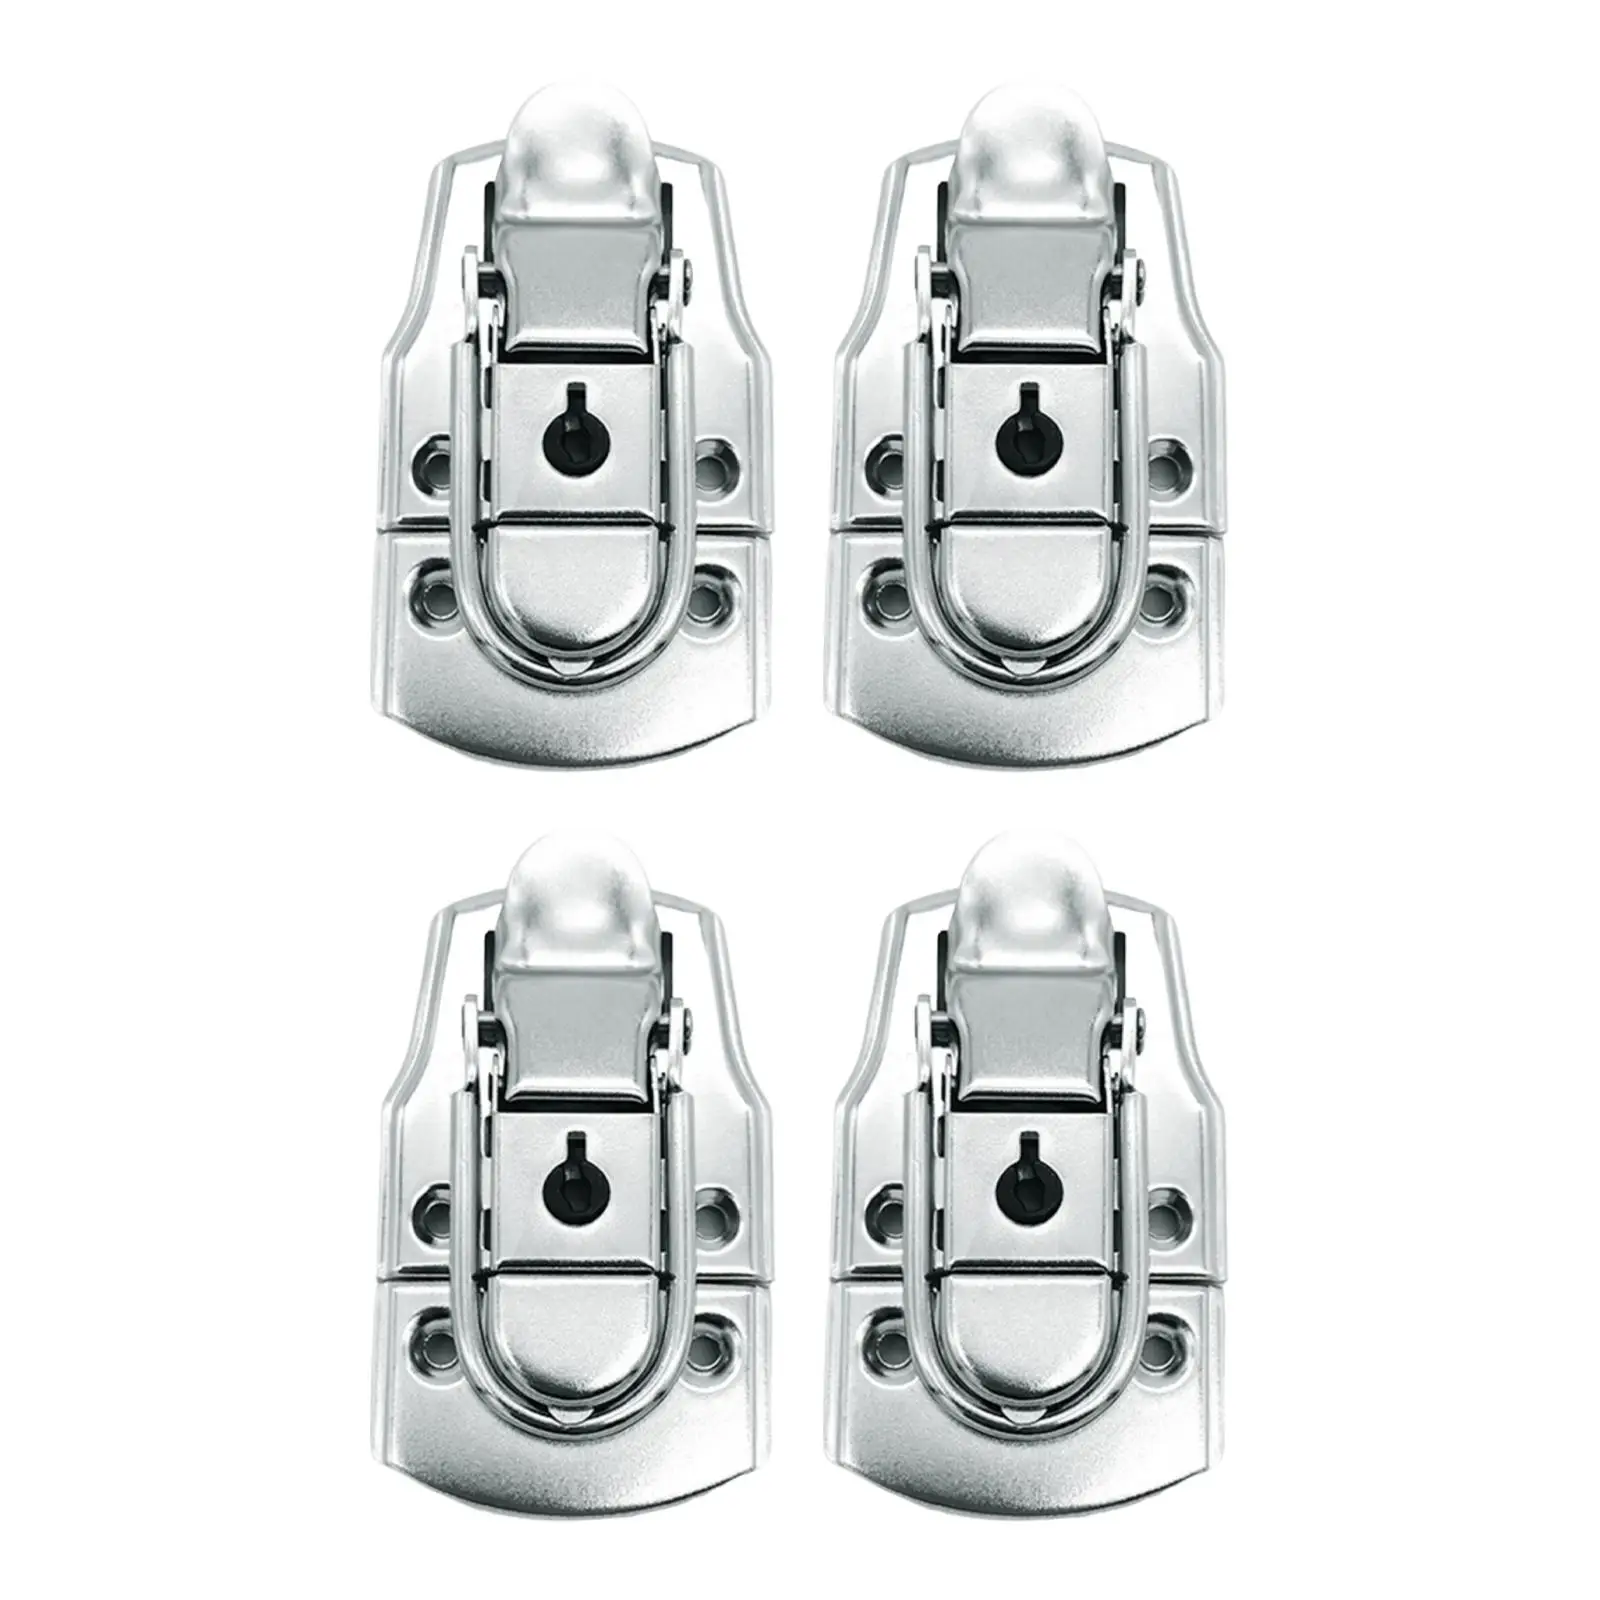 4x Toggle Hasp Latch Durable Smooth Locked Buckles for Wooden Box